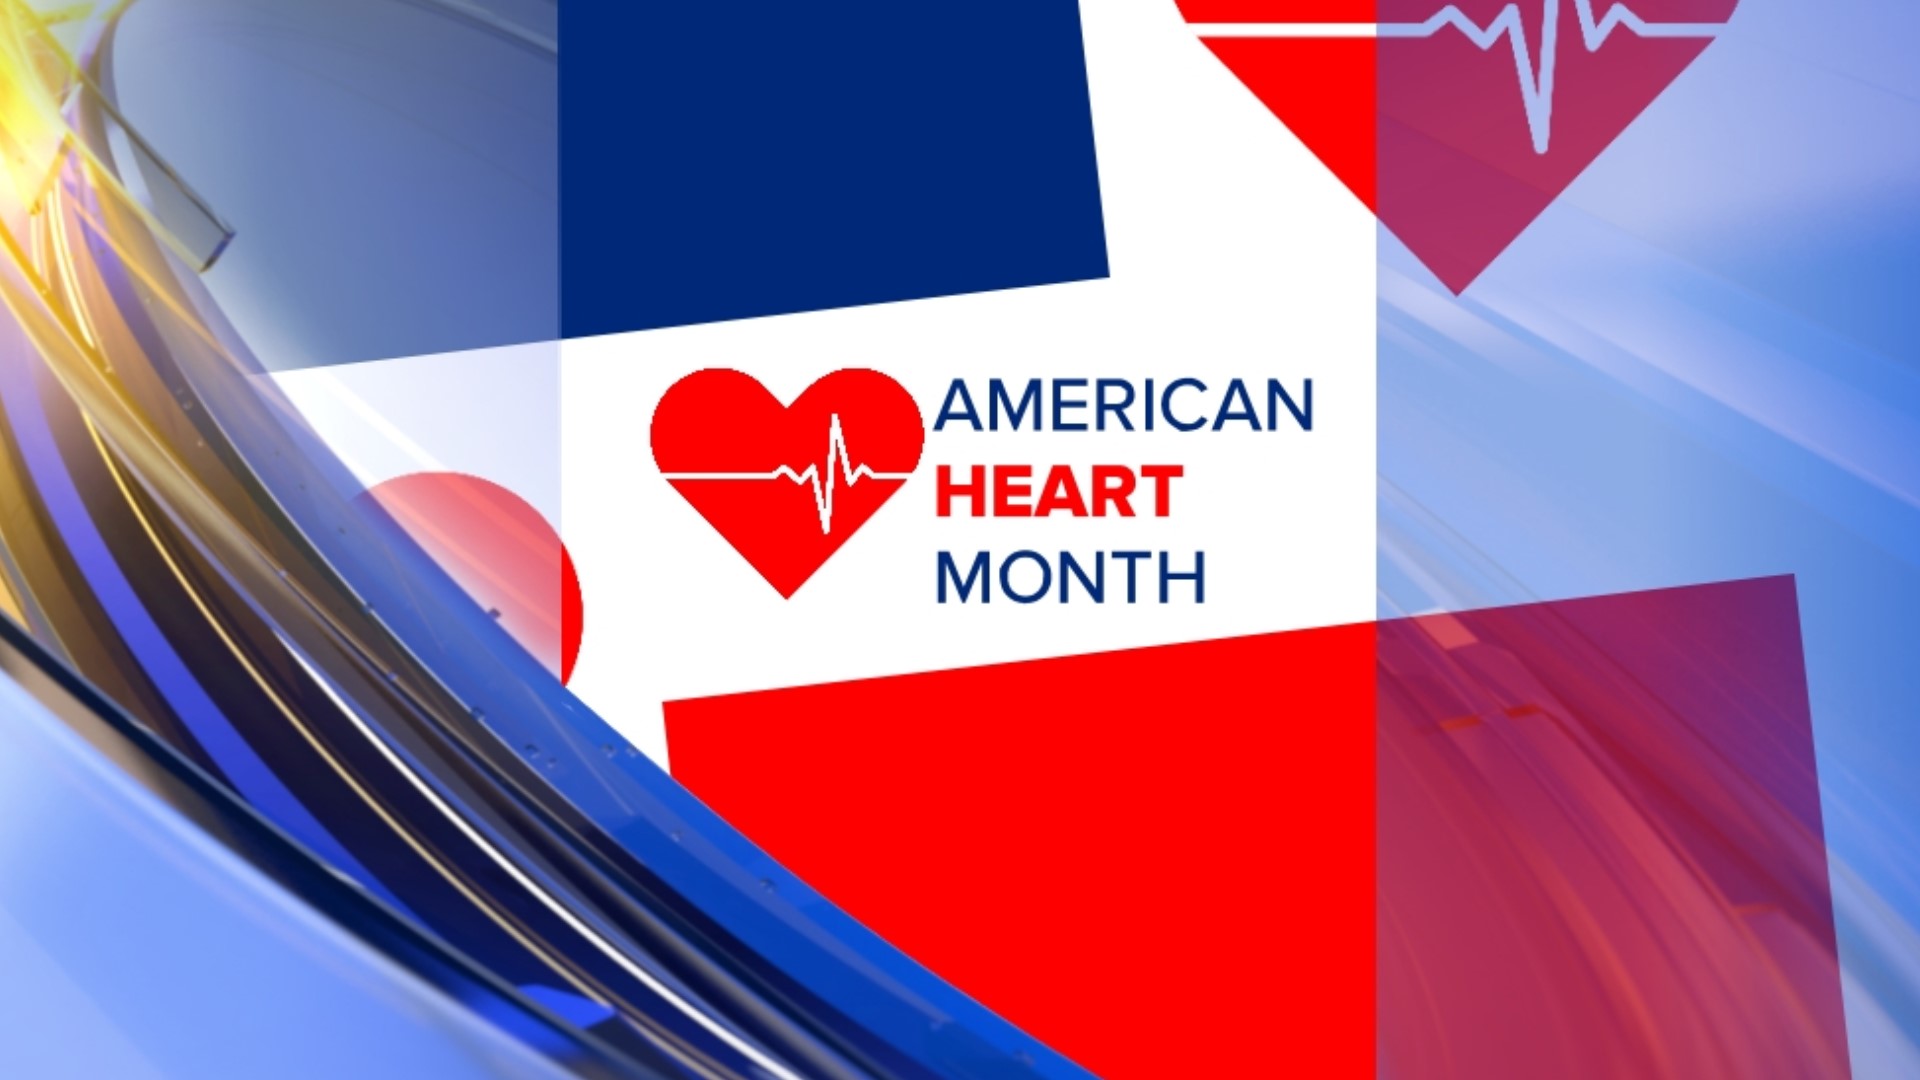 February is National Heart Month, which makes it a natural time to highlight people in the area whose hearts have been saved.